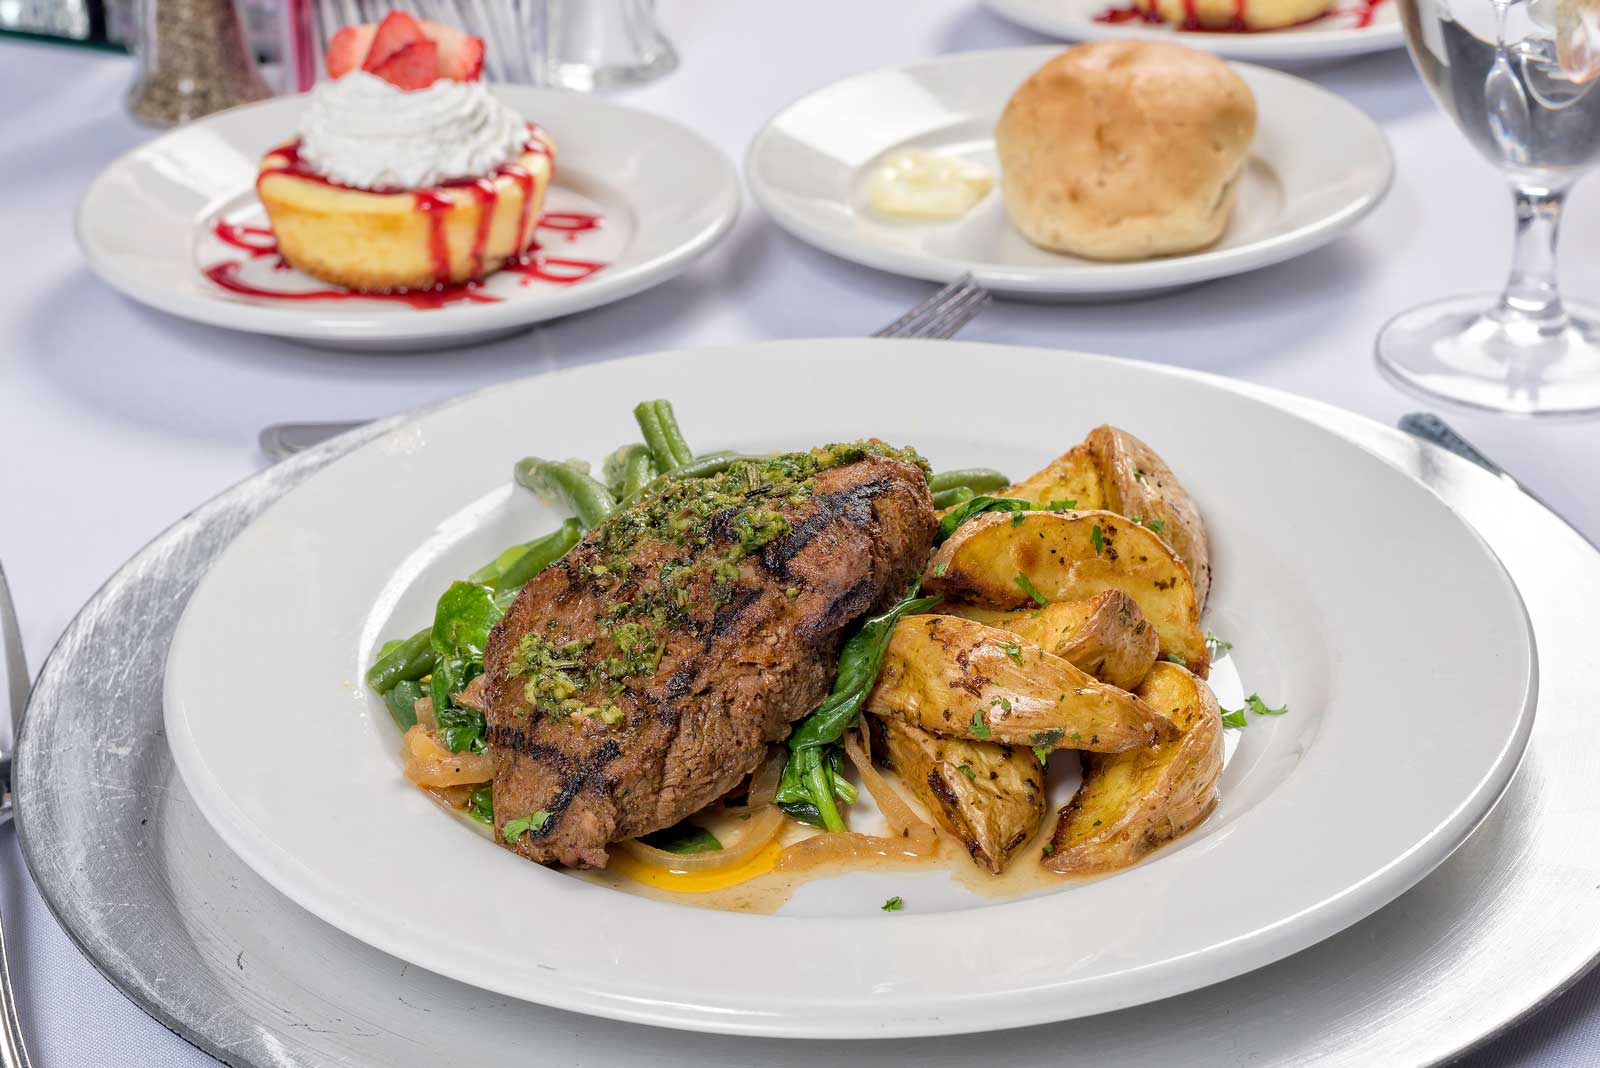 Catering by Norris delivers amazing meals for parties, weddings, dinners and all social occasions, New York Strip with green beans and wedge potatoes